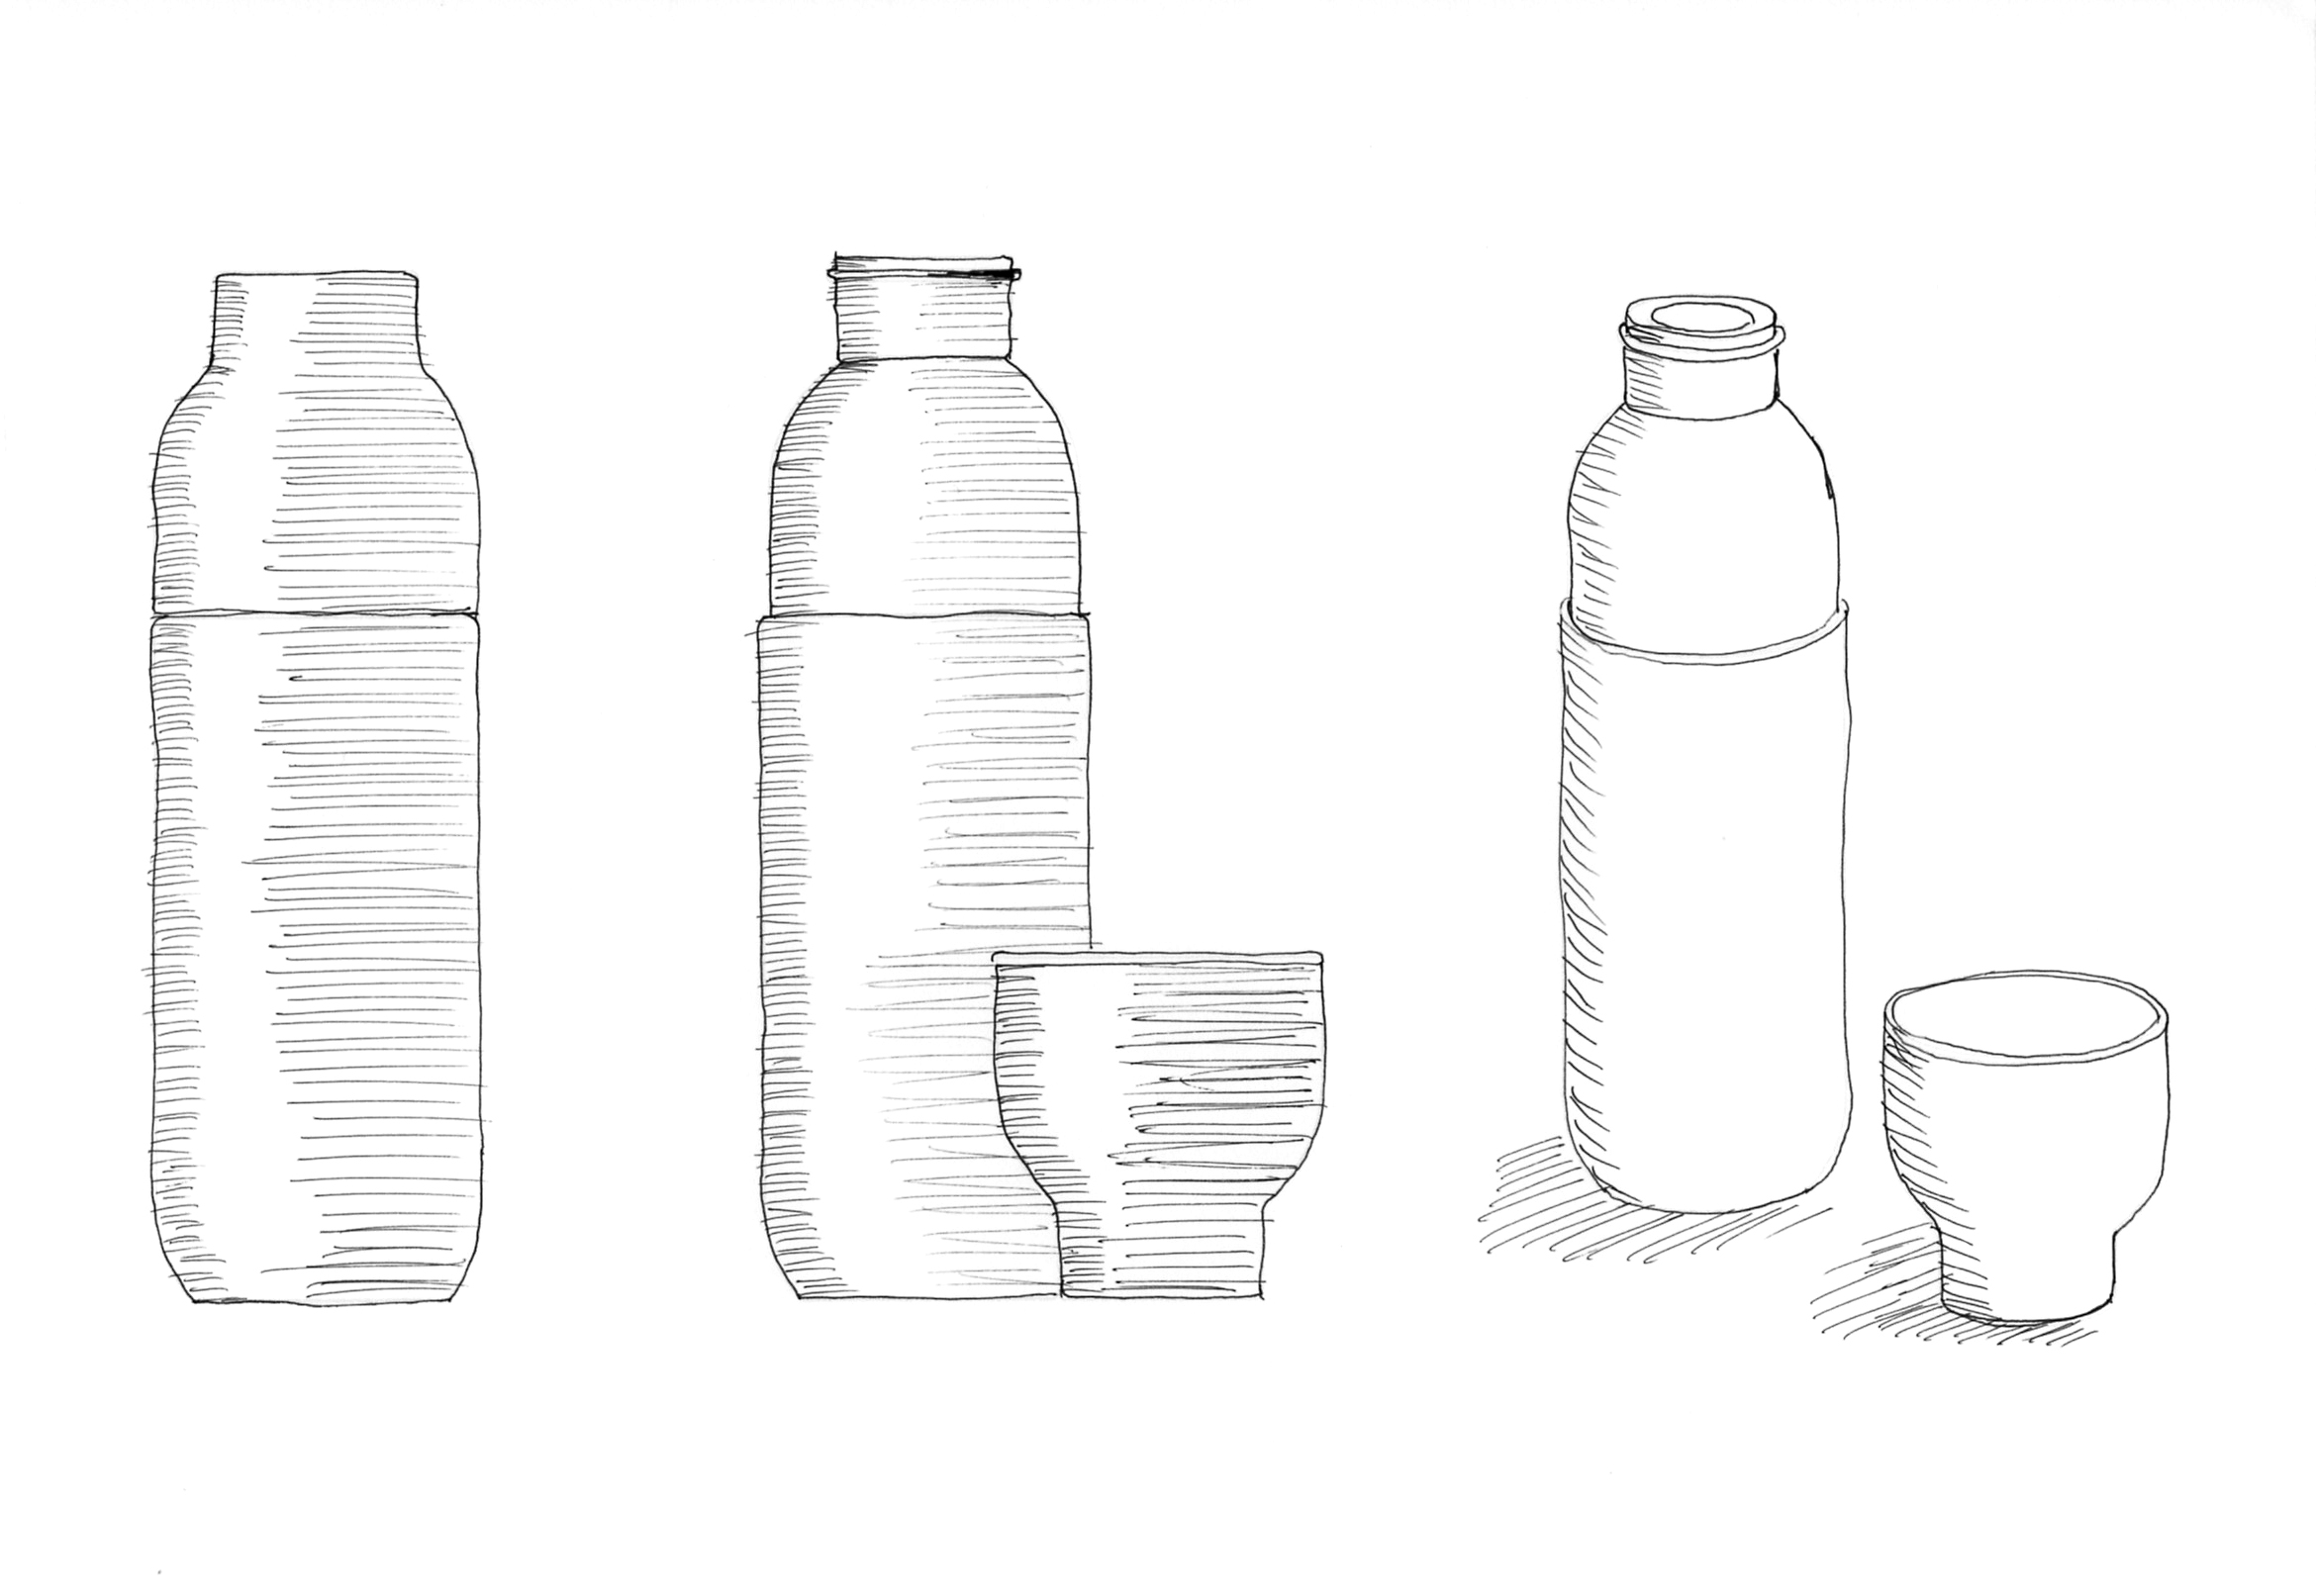 Sketch of the Collar thermo and water bottle by Debiasi Sandri for Stelton